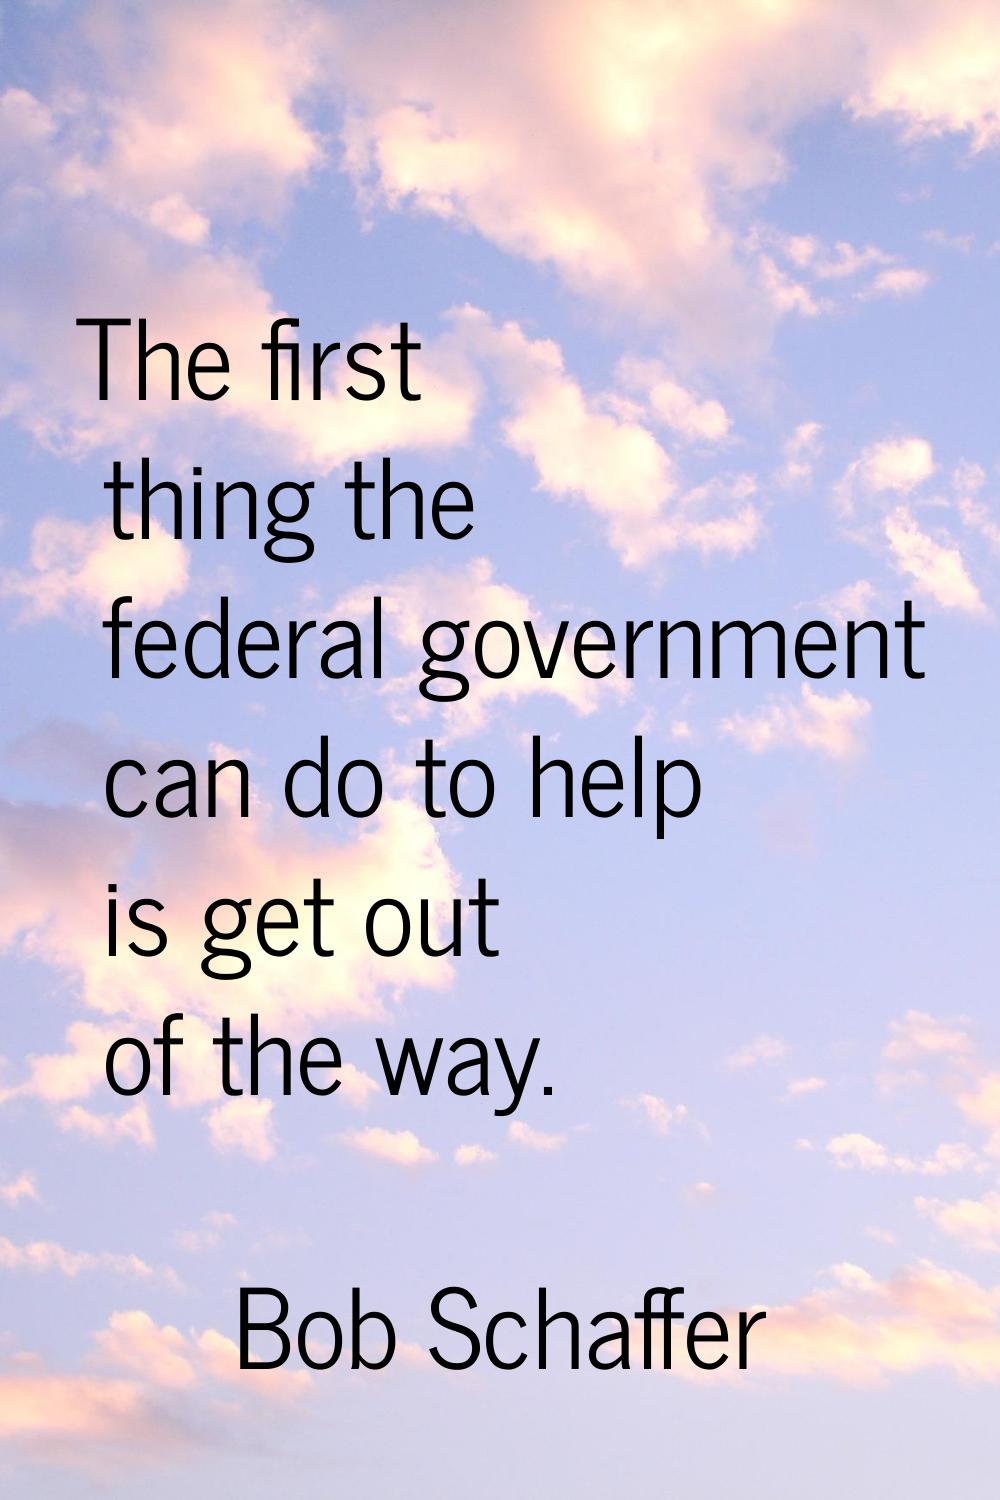 The first thing the federal government can do to help is get out of the way.